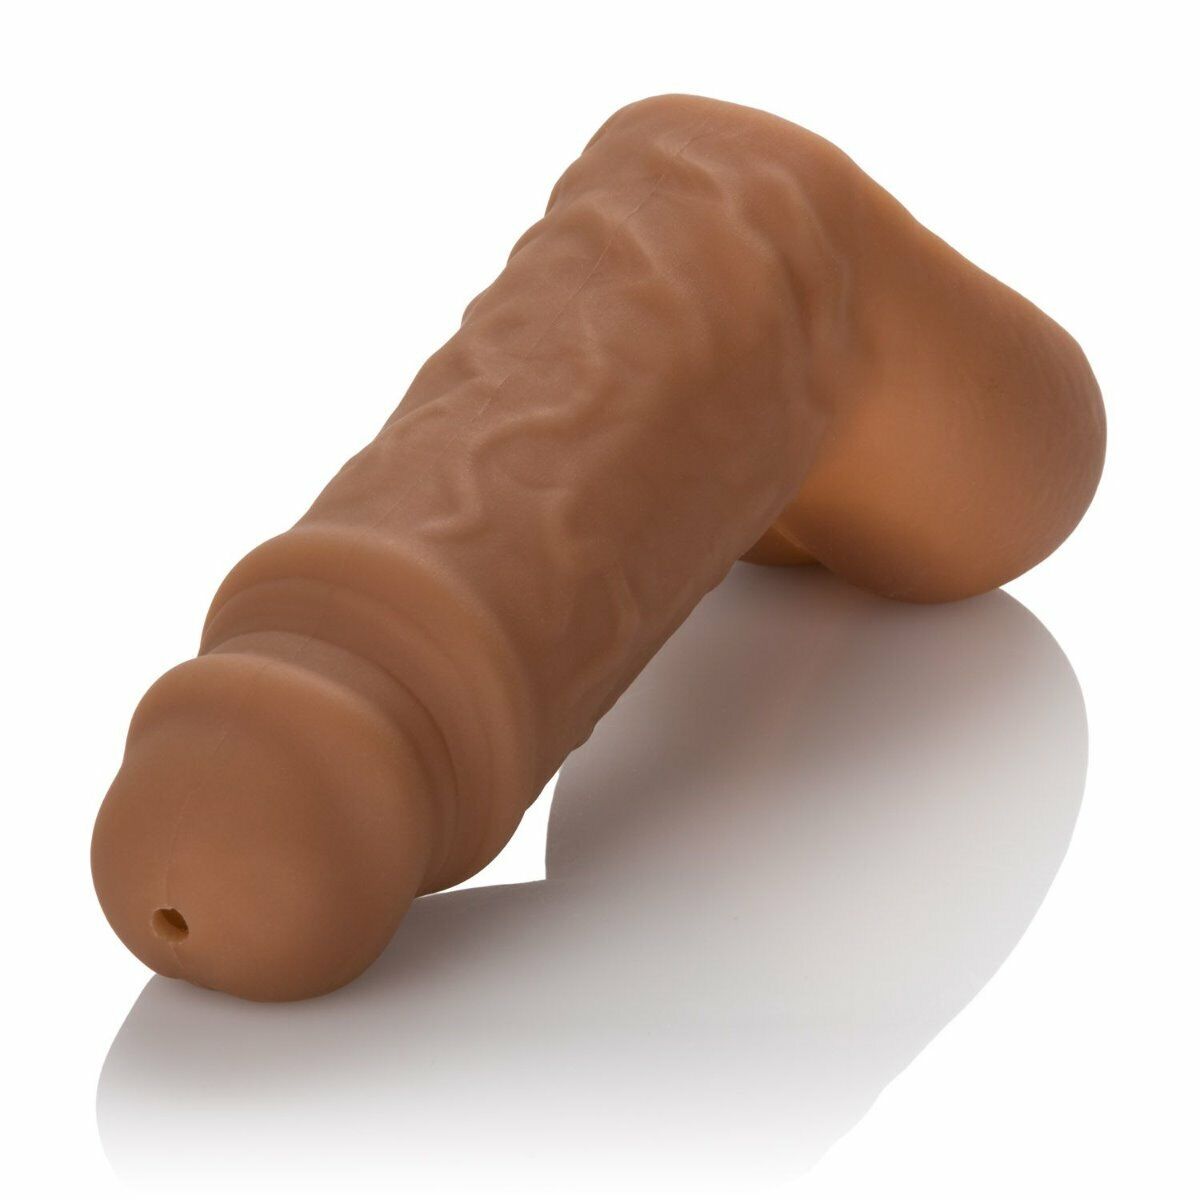 Soft Silicone Black Hollow Stand to Pee FTM STP Packer Gear Penis